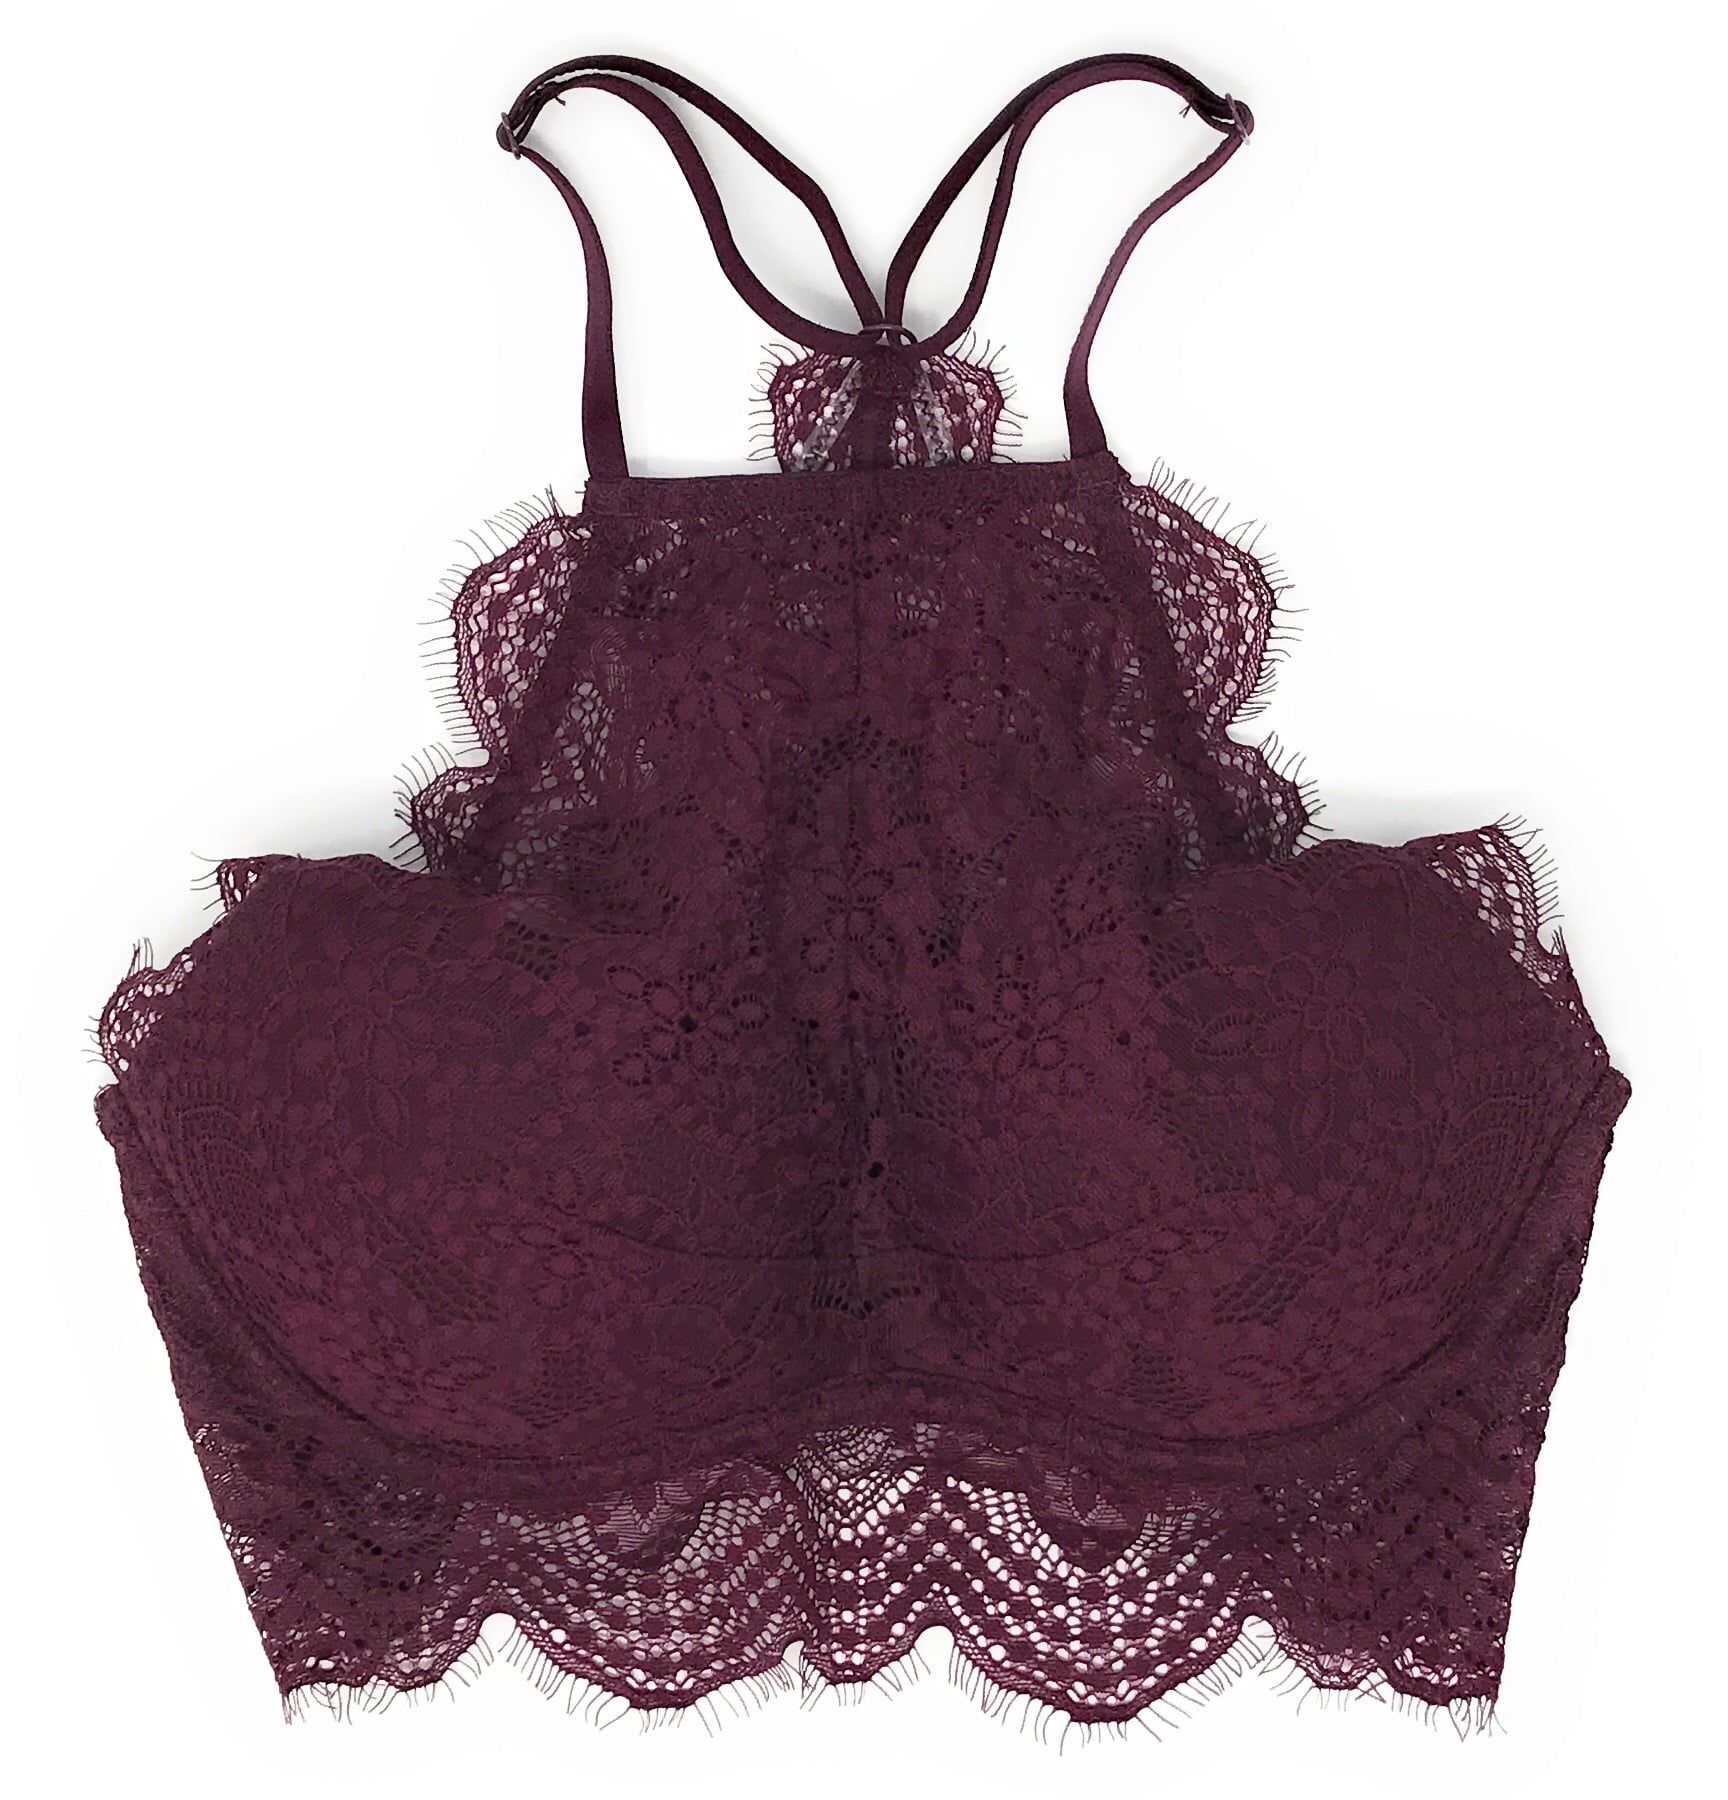 PINK - Victoria's Secret PINK By VS High Neck Lace Push Up Bralette - $16 -  From Katie